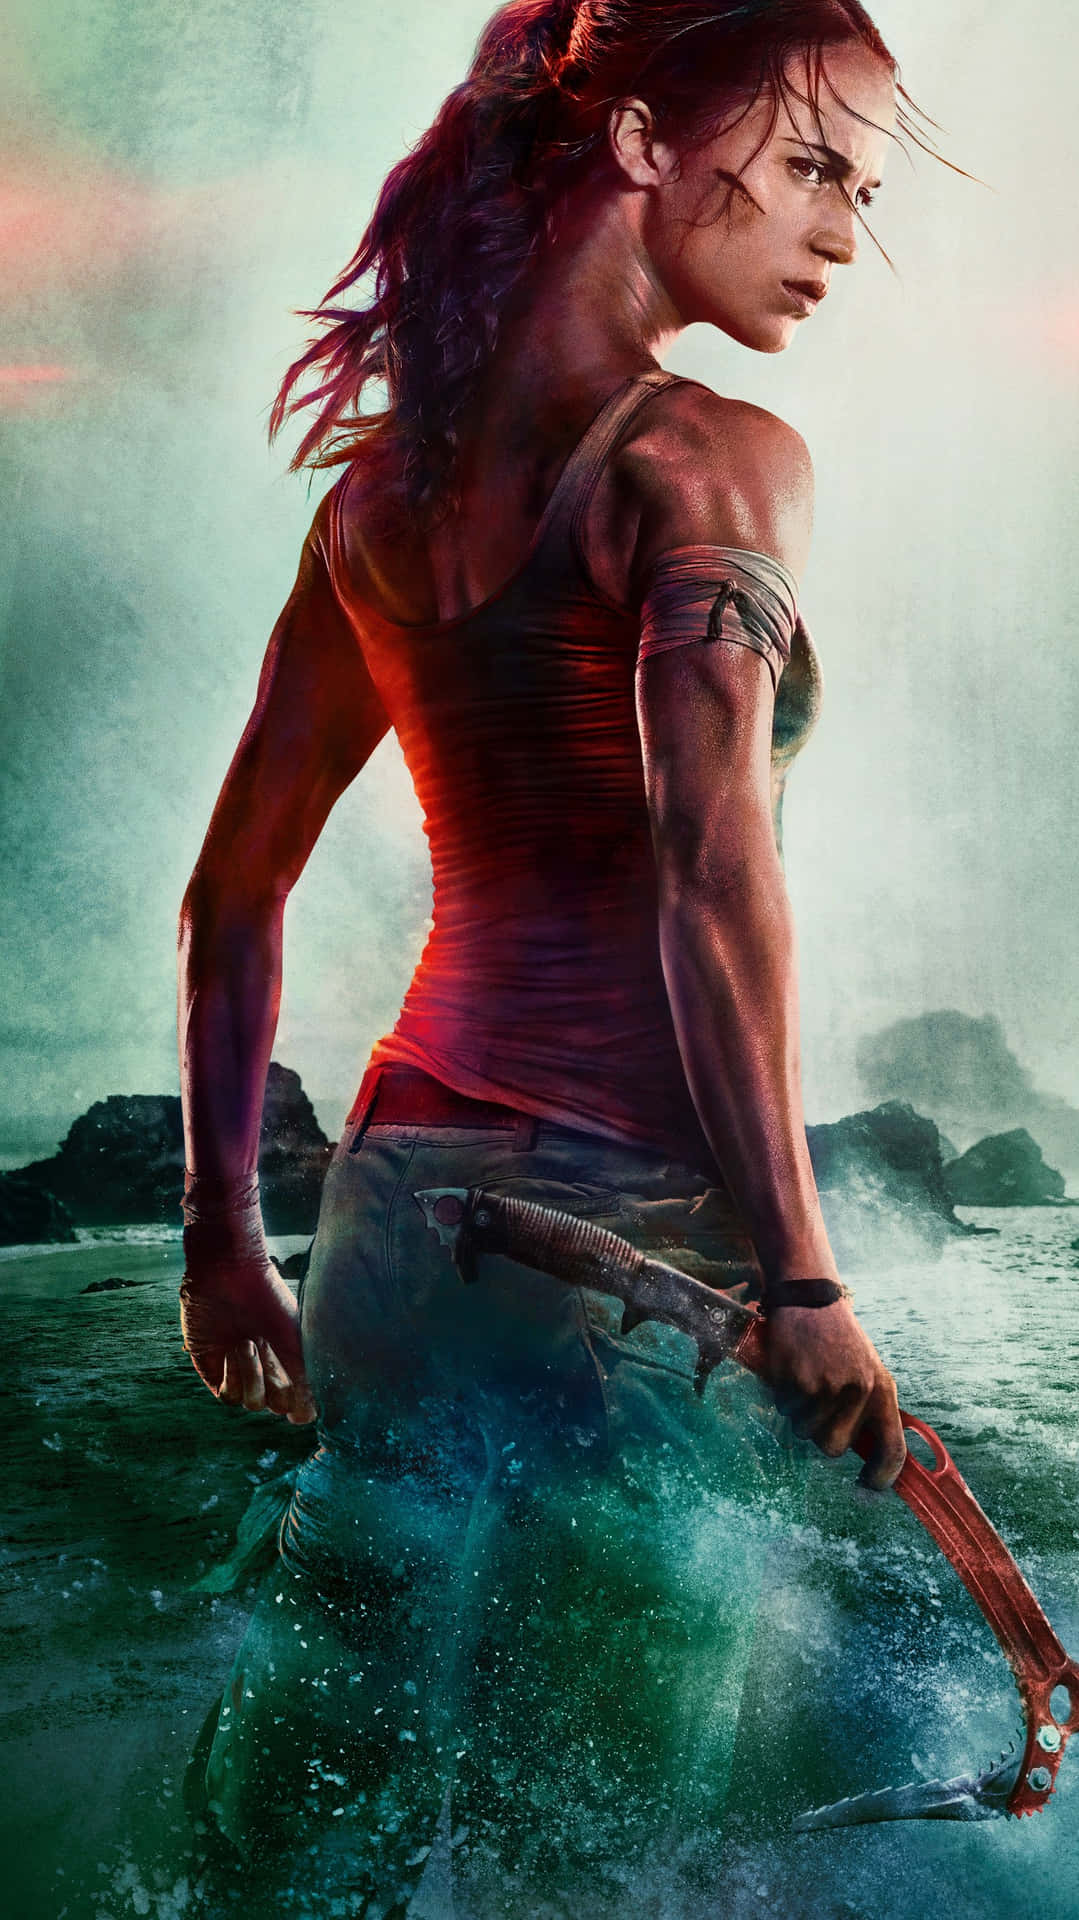 Seize The Adventure with the Tomb Raider Phone Wallpaper